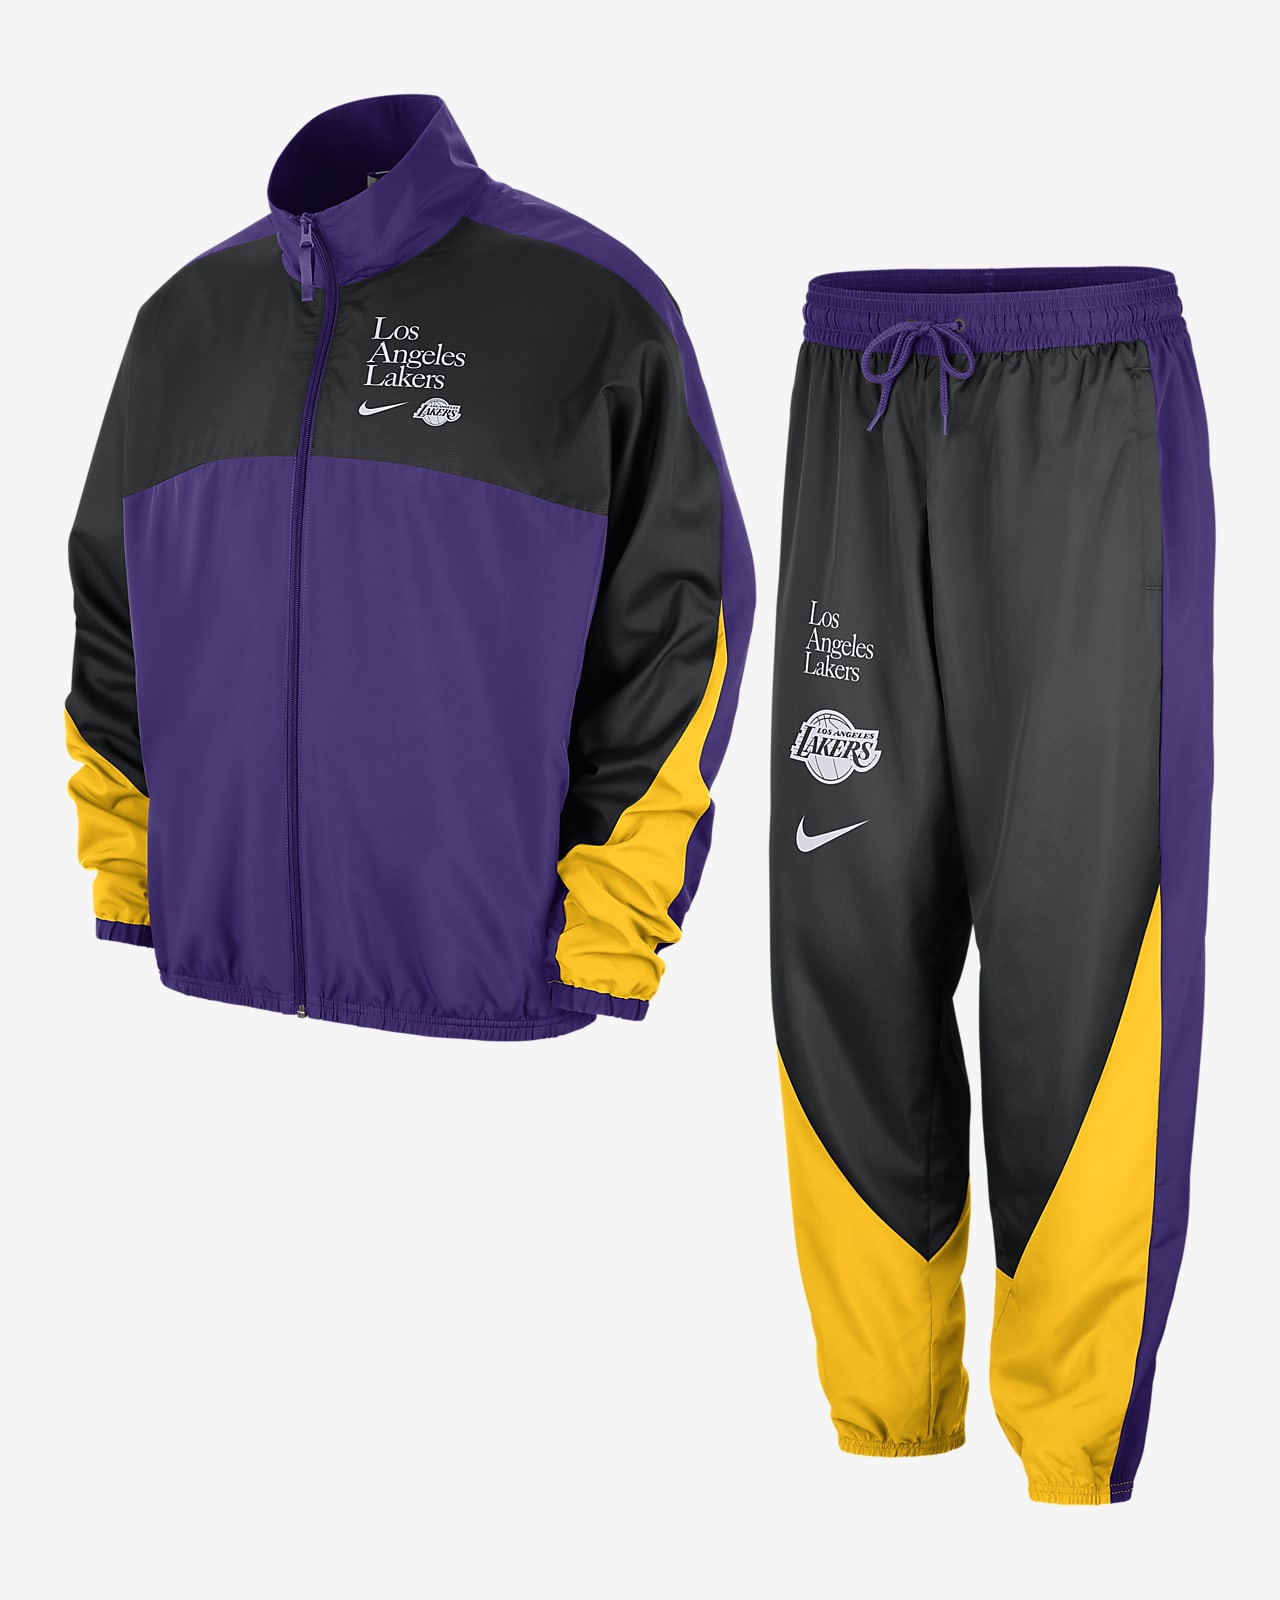 Los Angeles Lakers Starting 5 Courtside Men's Nike NBA Graphic Tracksuit